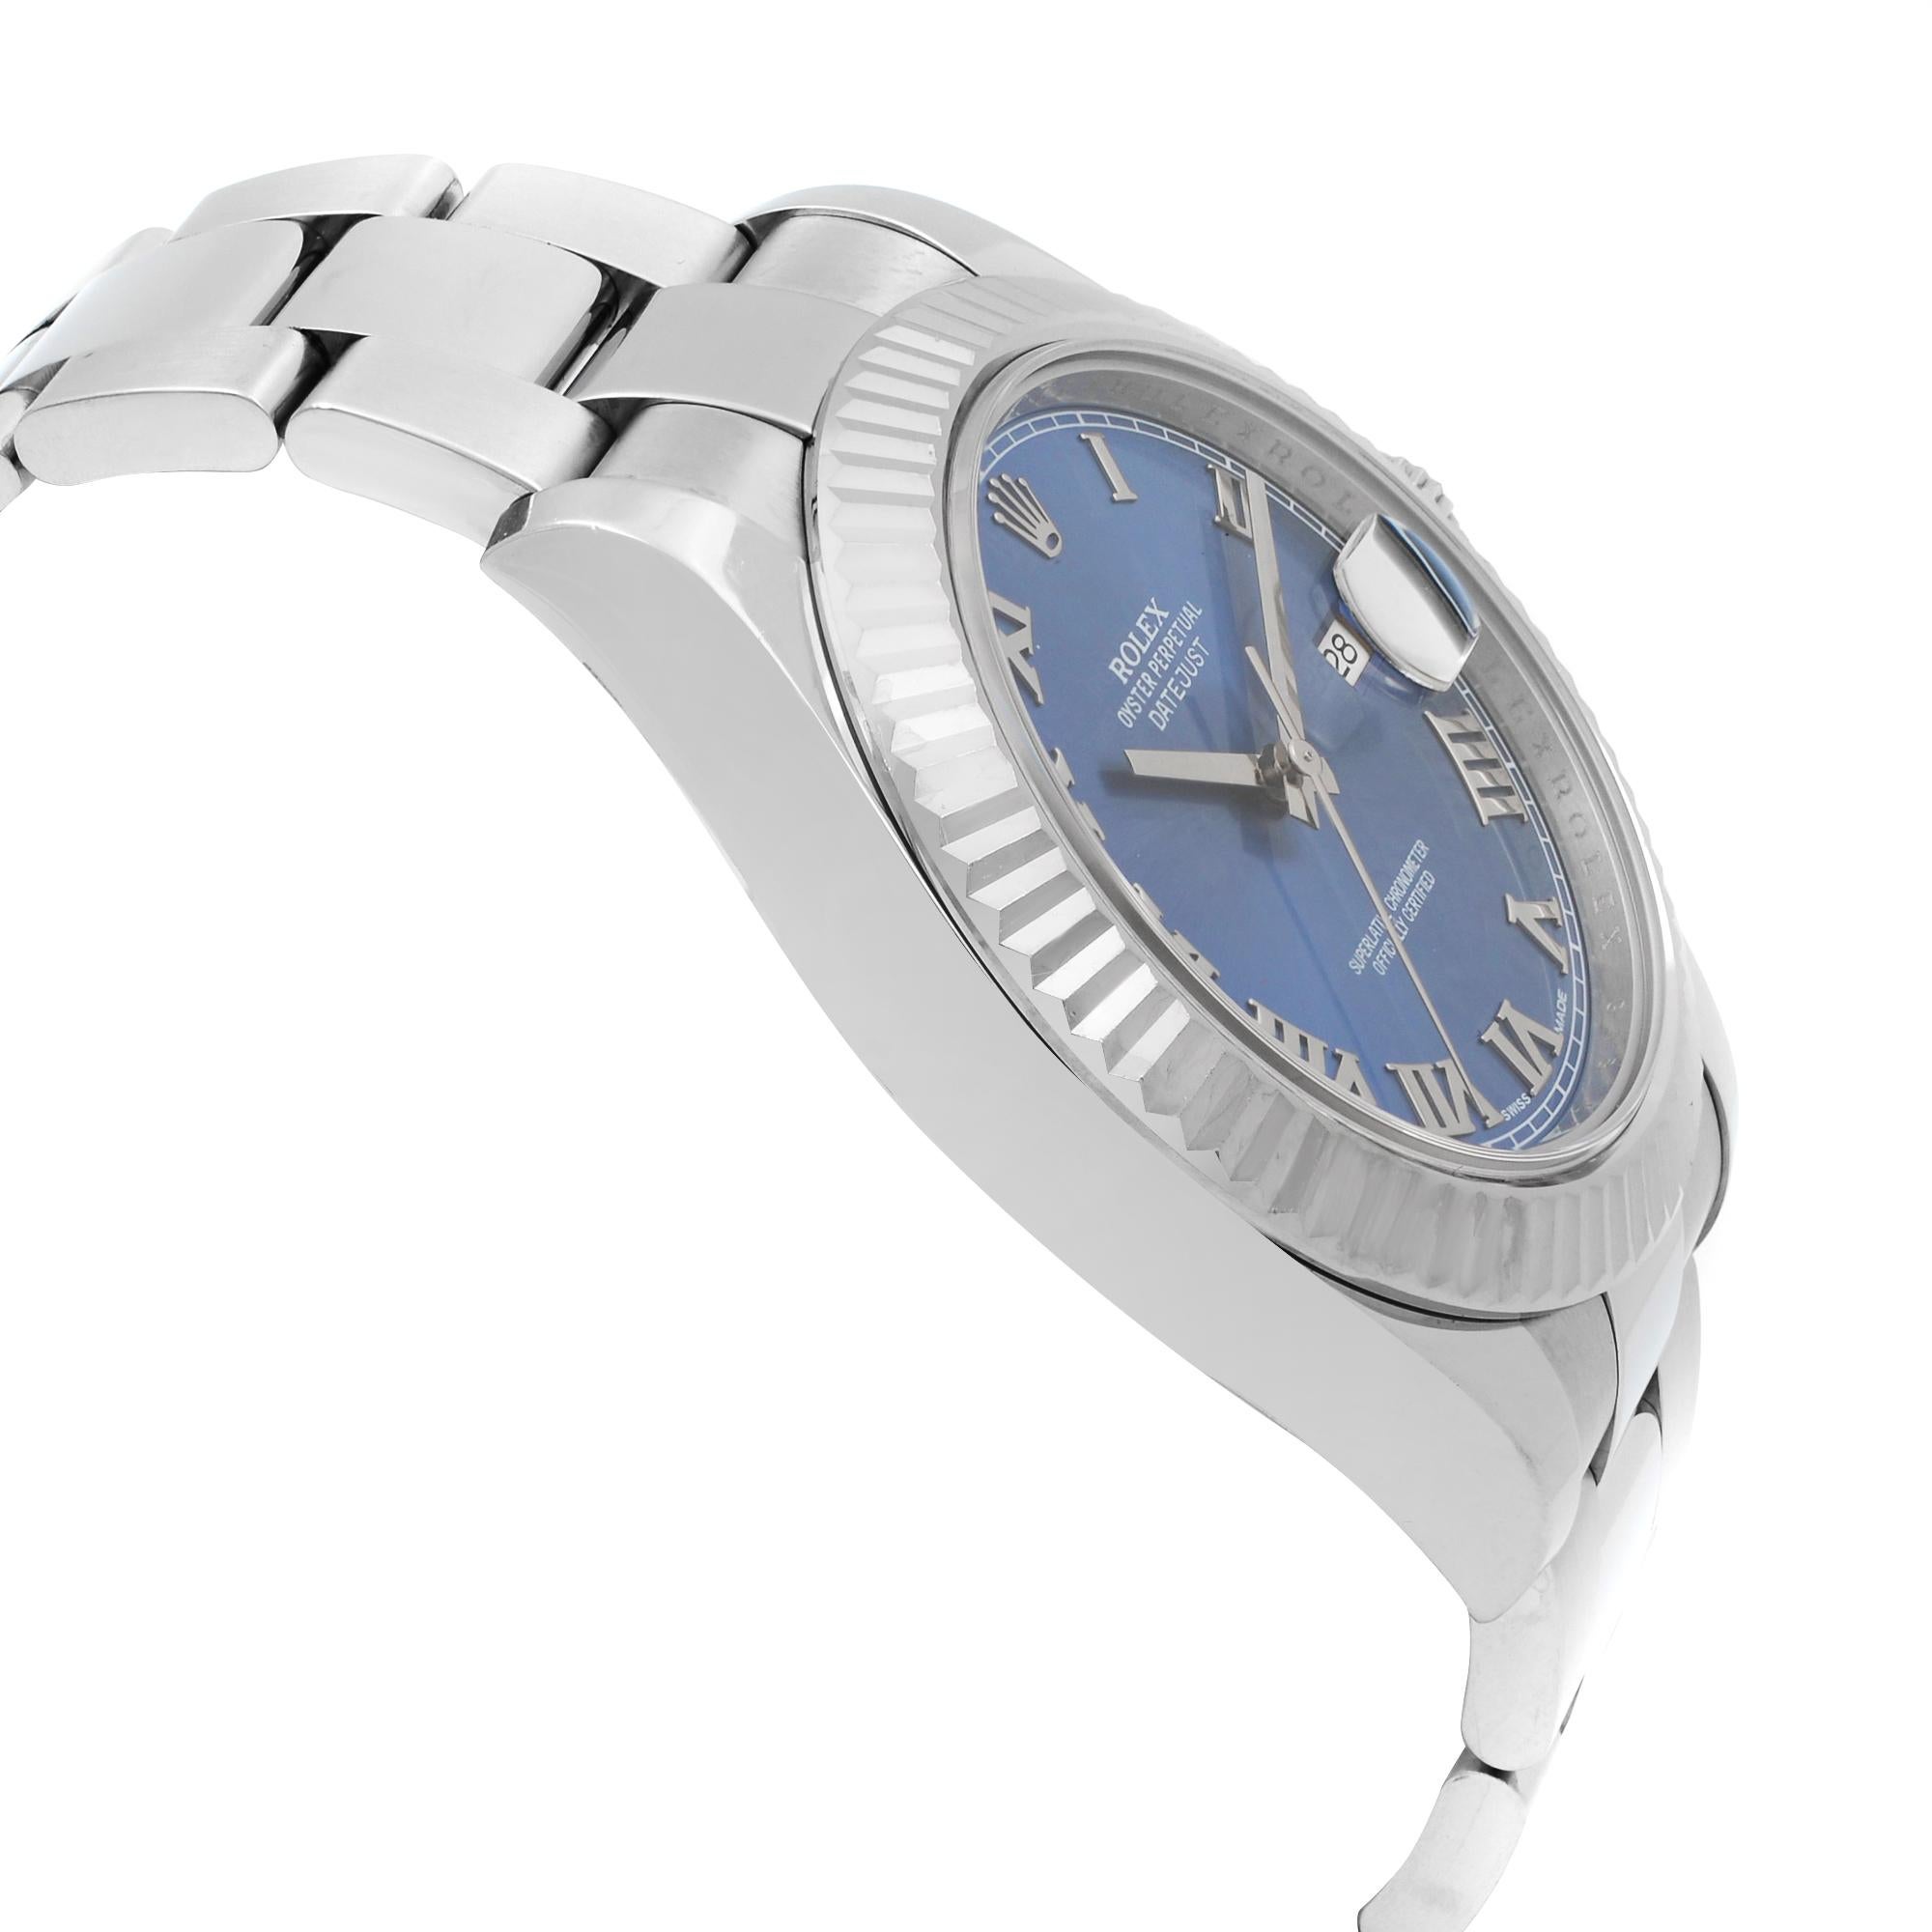 datejust 2 blue dial